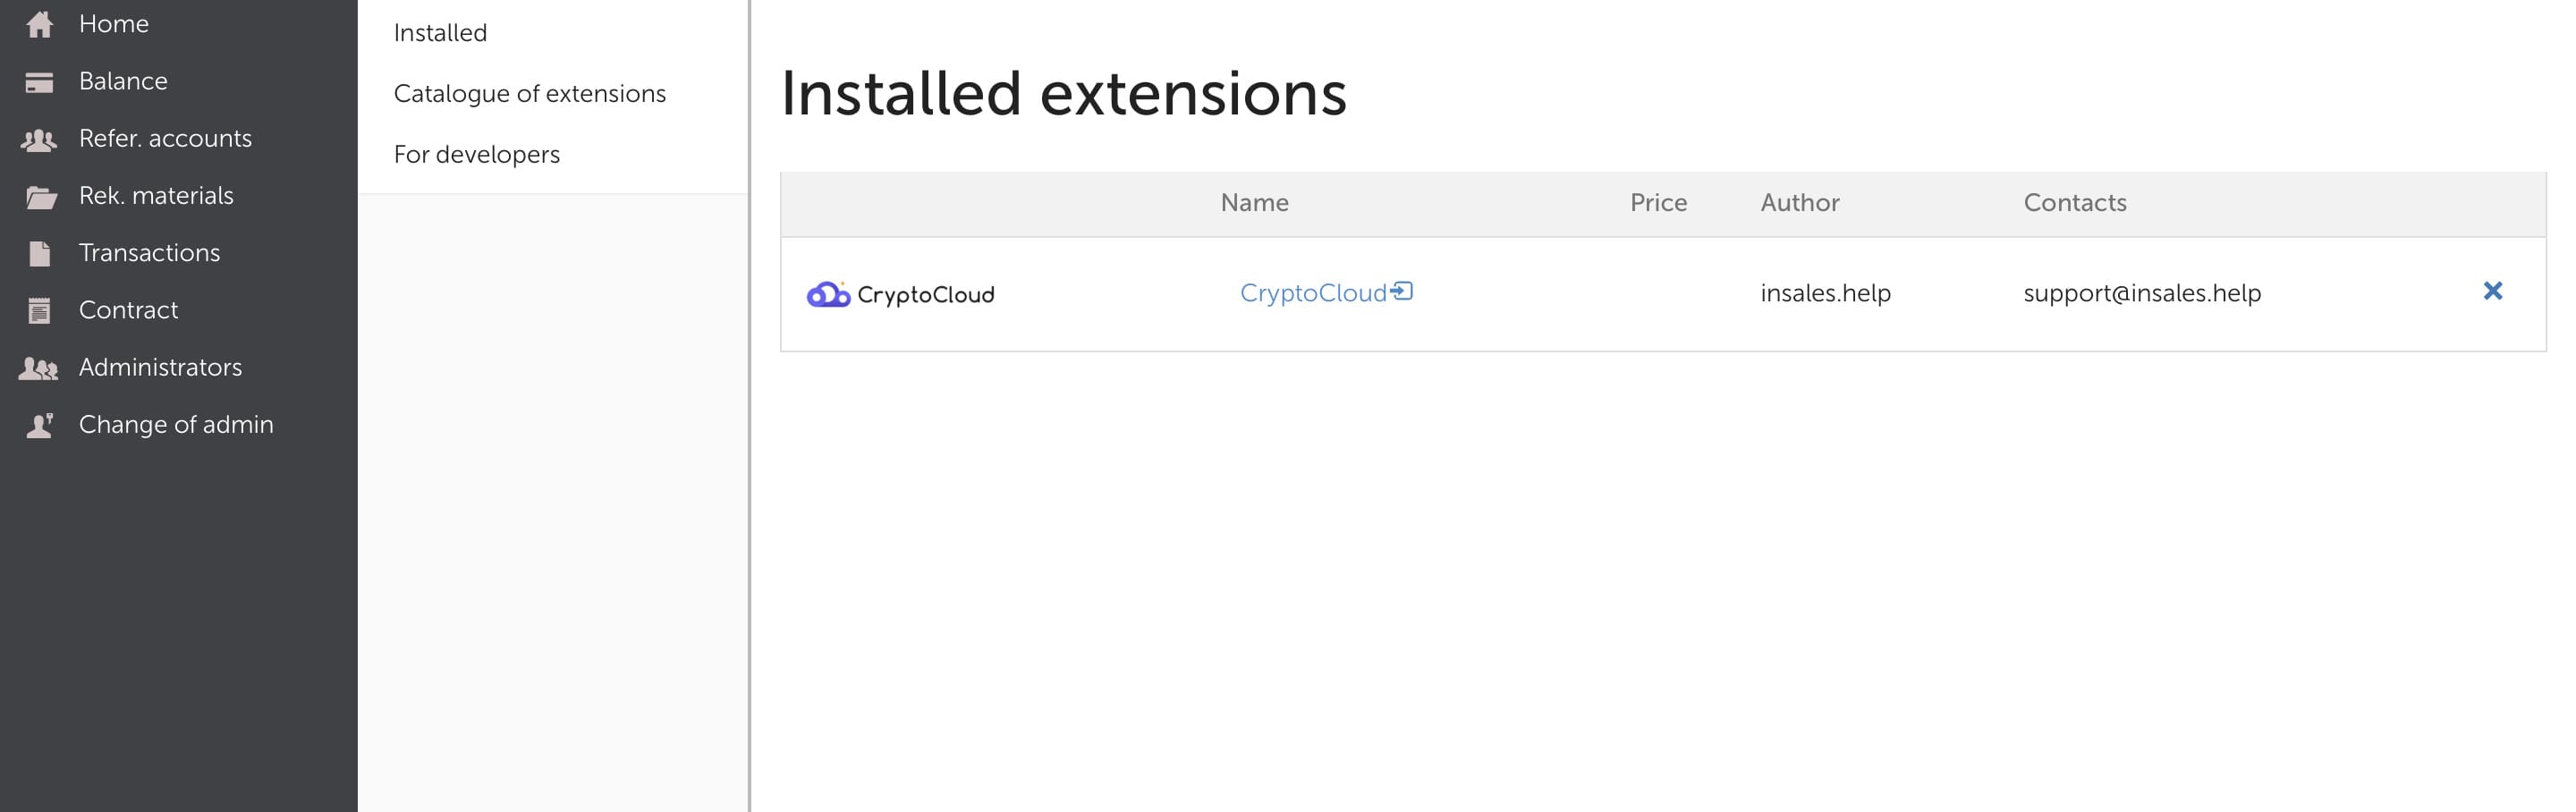 CryptoCloud integration with a website on Insales